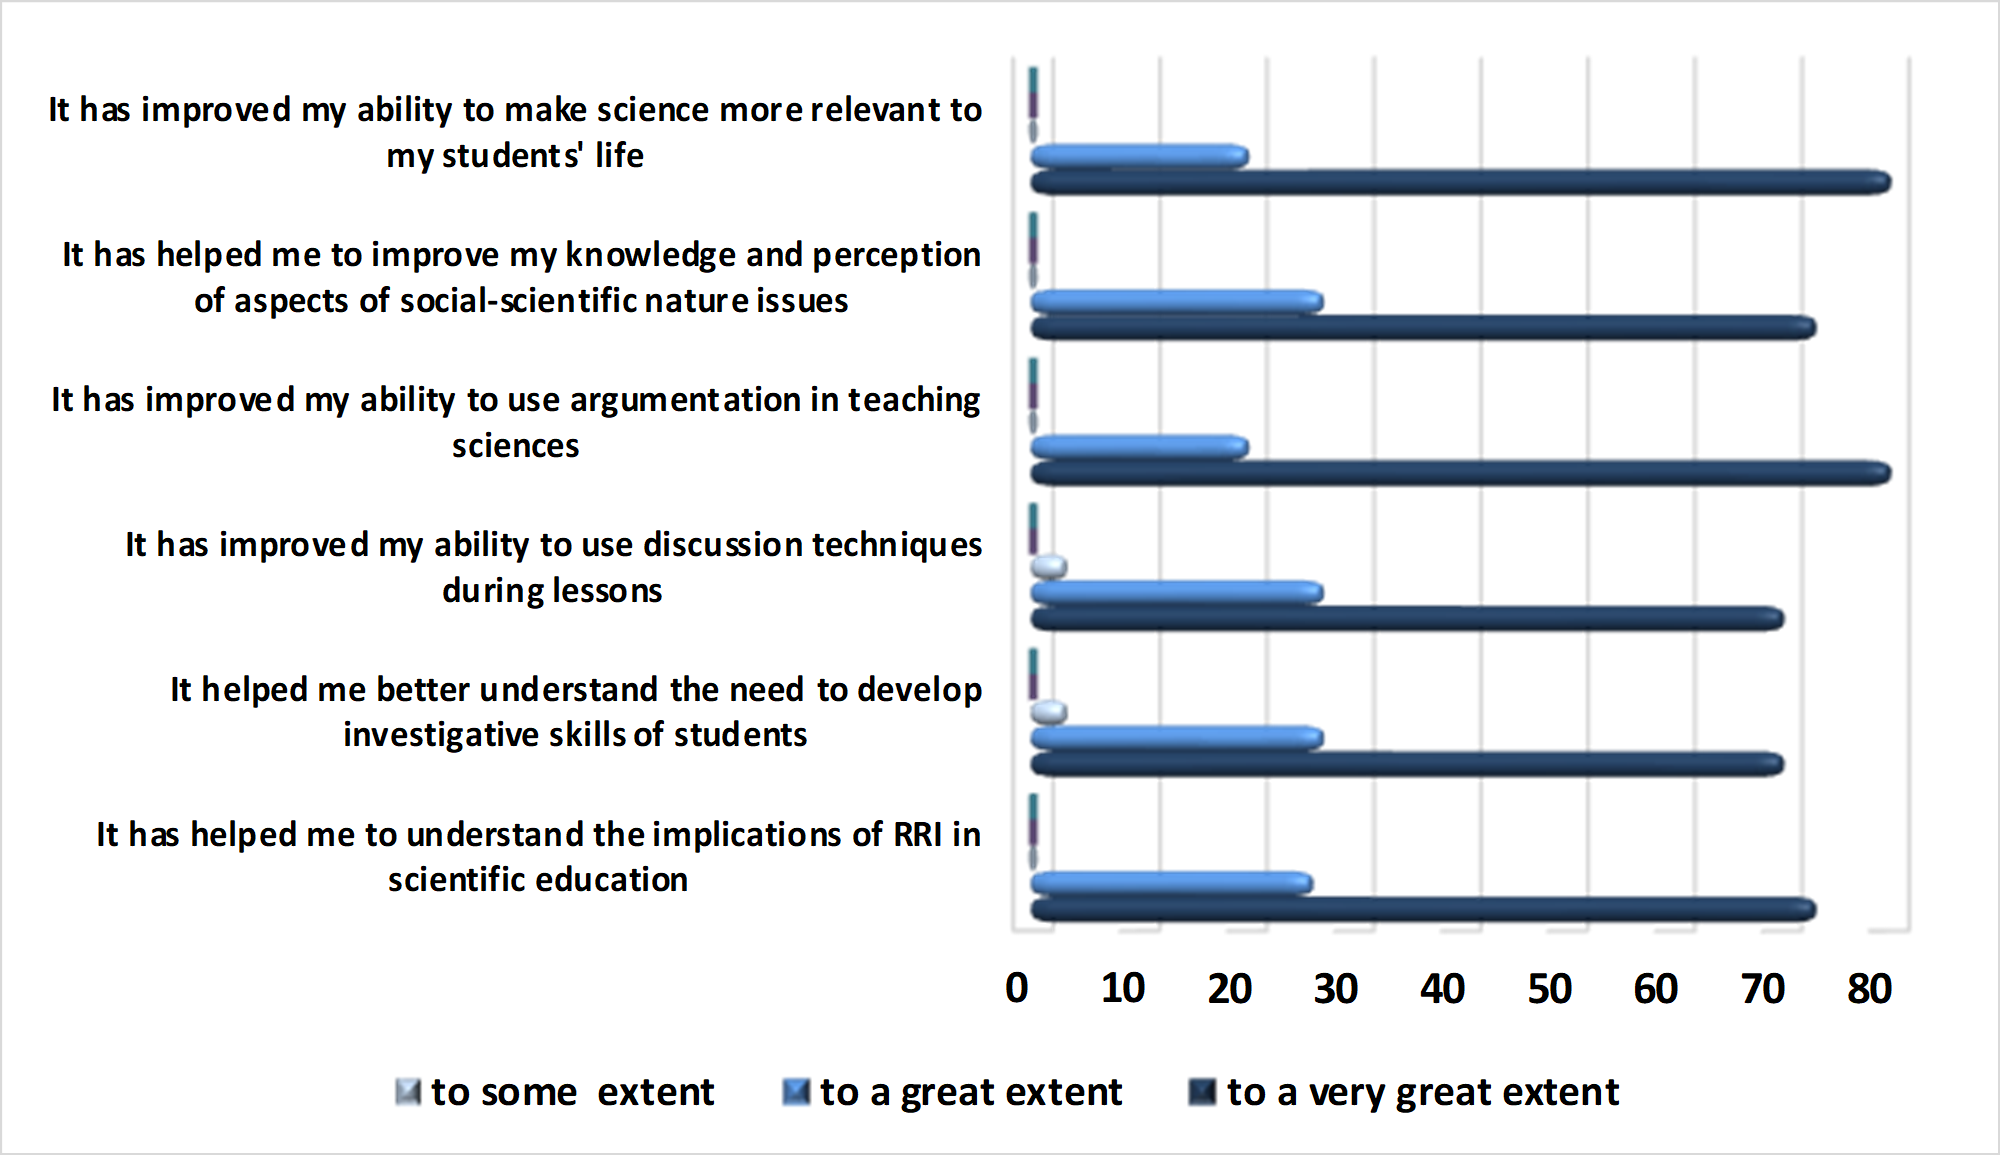 The impact of the Engage Project on the development of the teachers’ professional skills